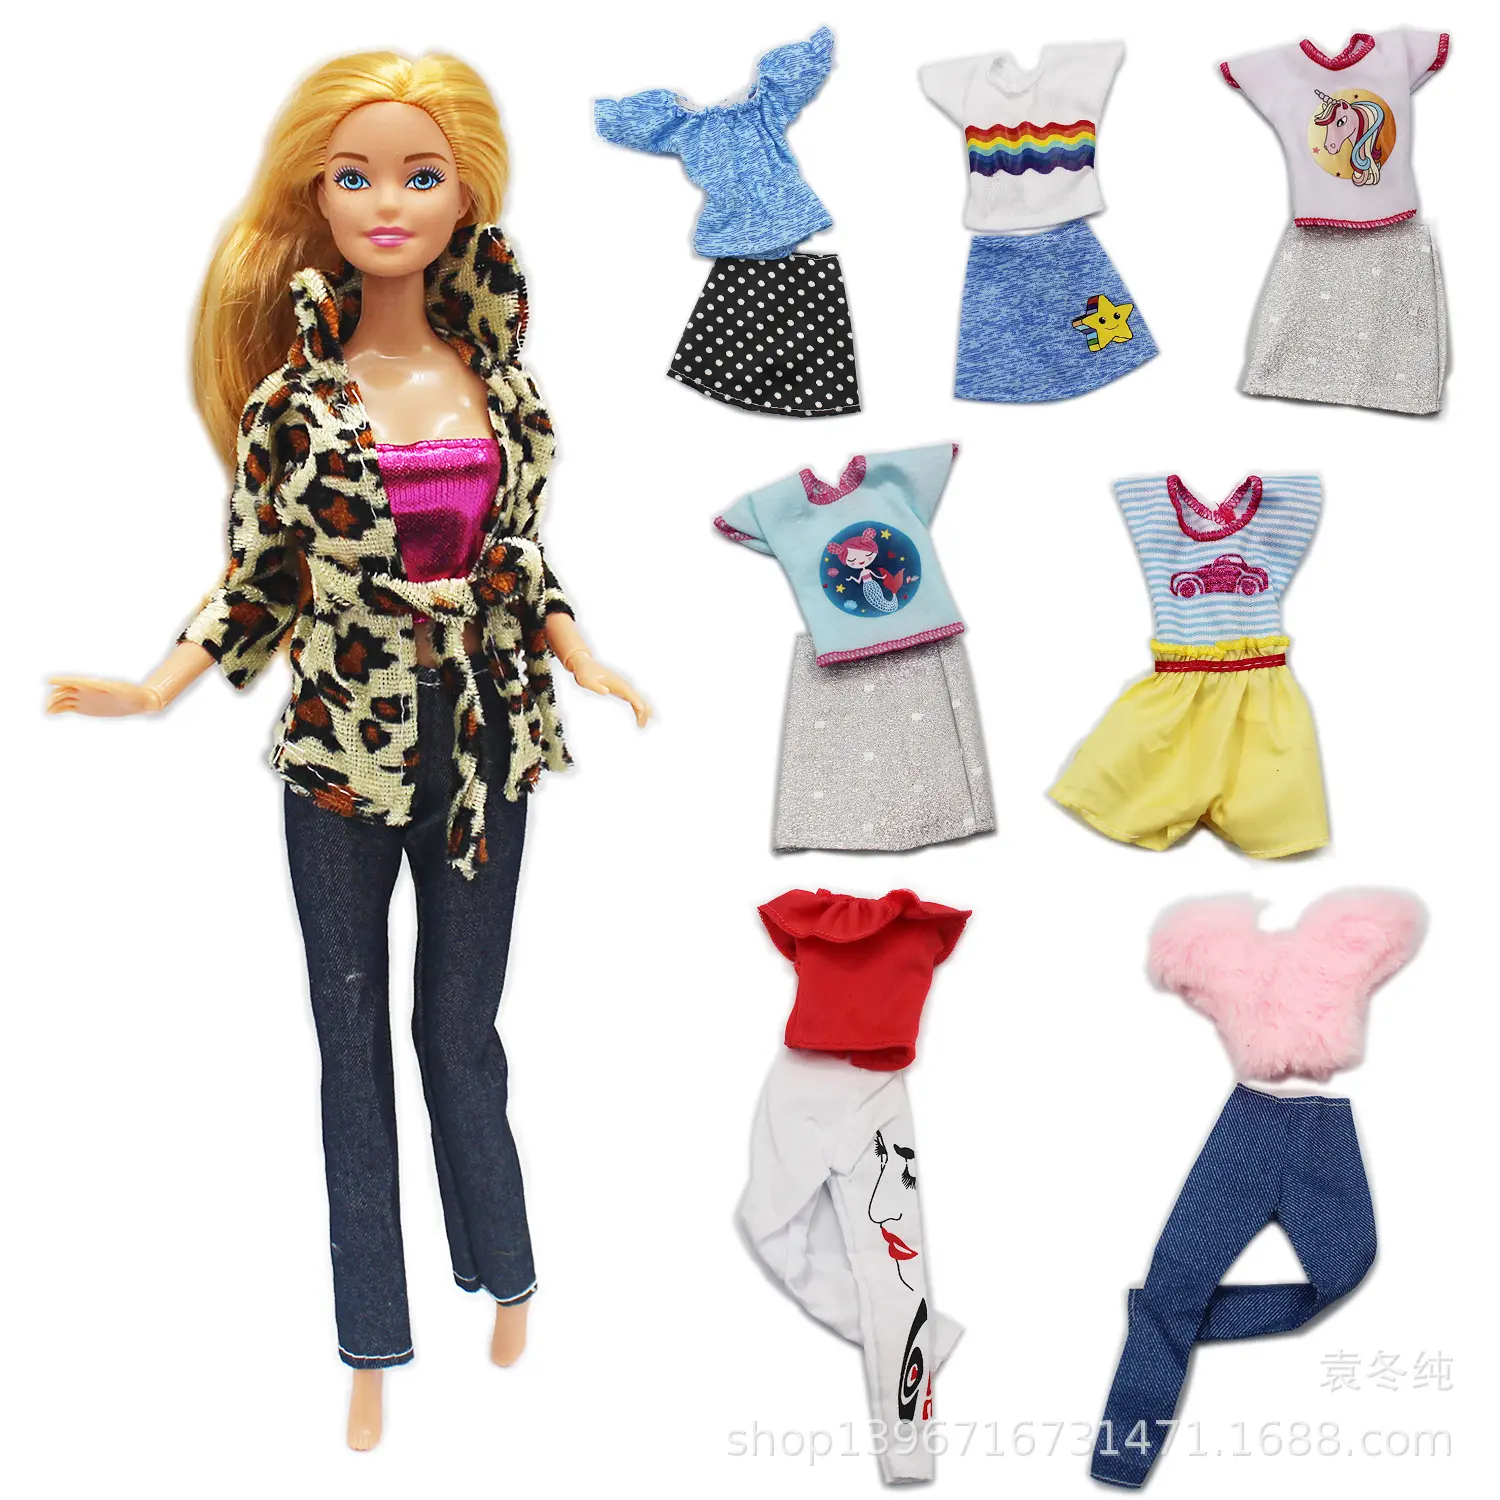 New Design 11.5-12inches Fashion Top and Bottom Suits Fashion Skirts Barbie Doll Clothes Accessories Toys for Children Girl Gift